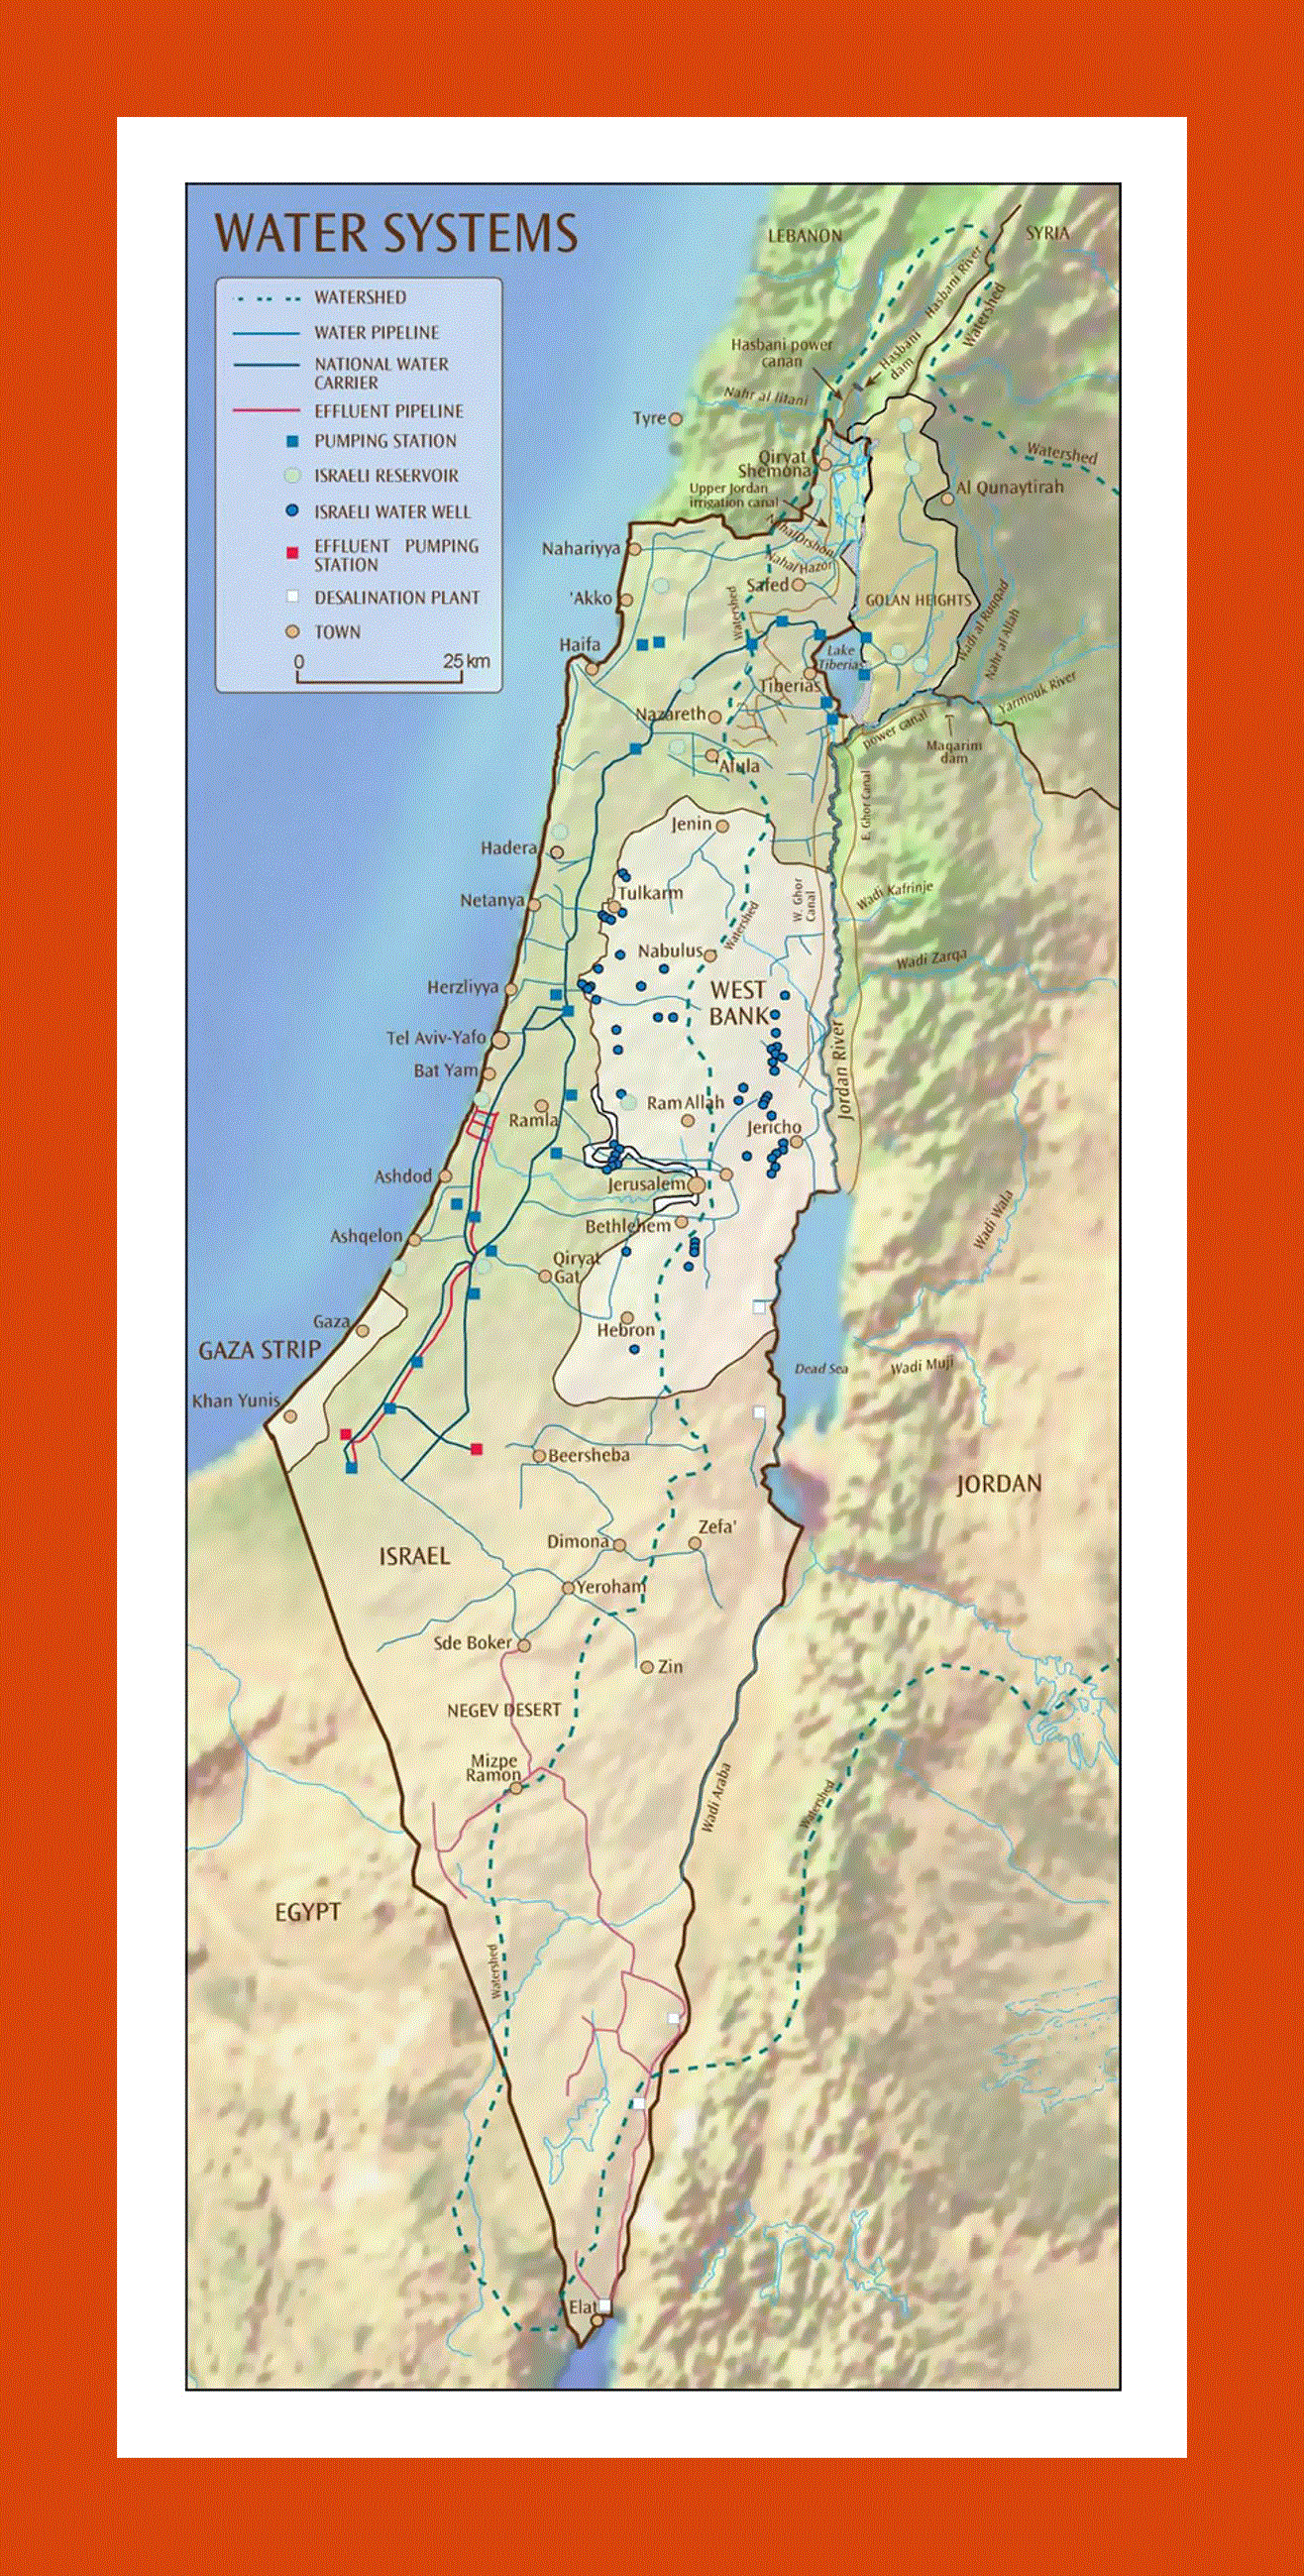 Water systems map of Israel